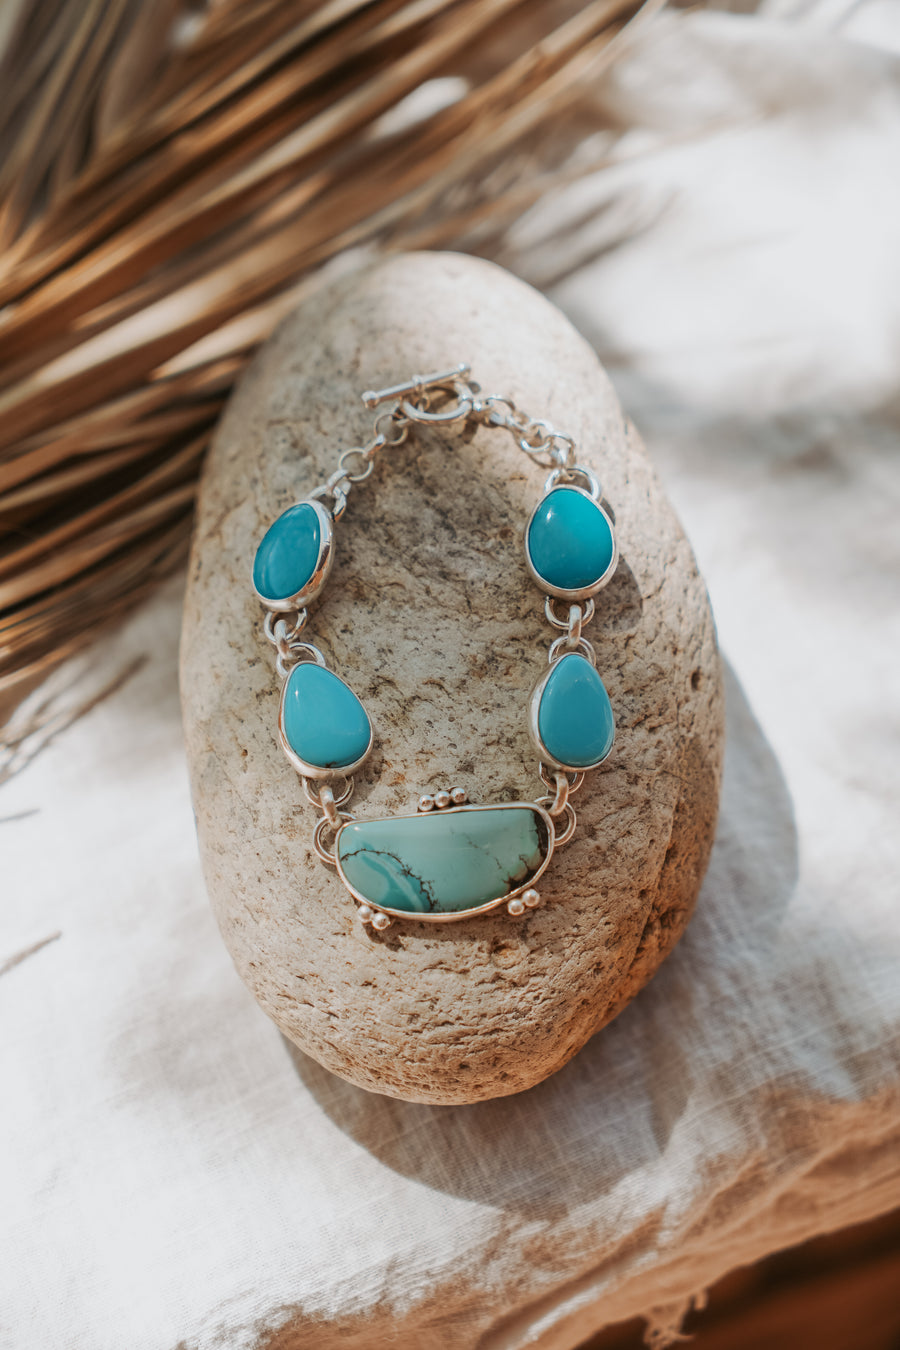 The Stepping Stone Bracelet in Campitos & Hubei Turquoise